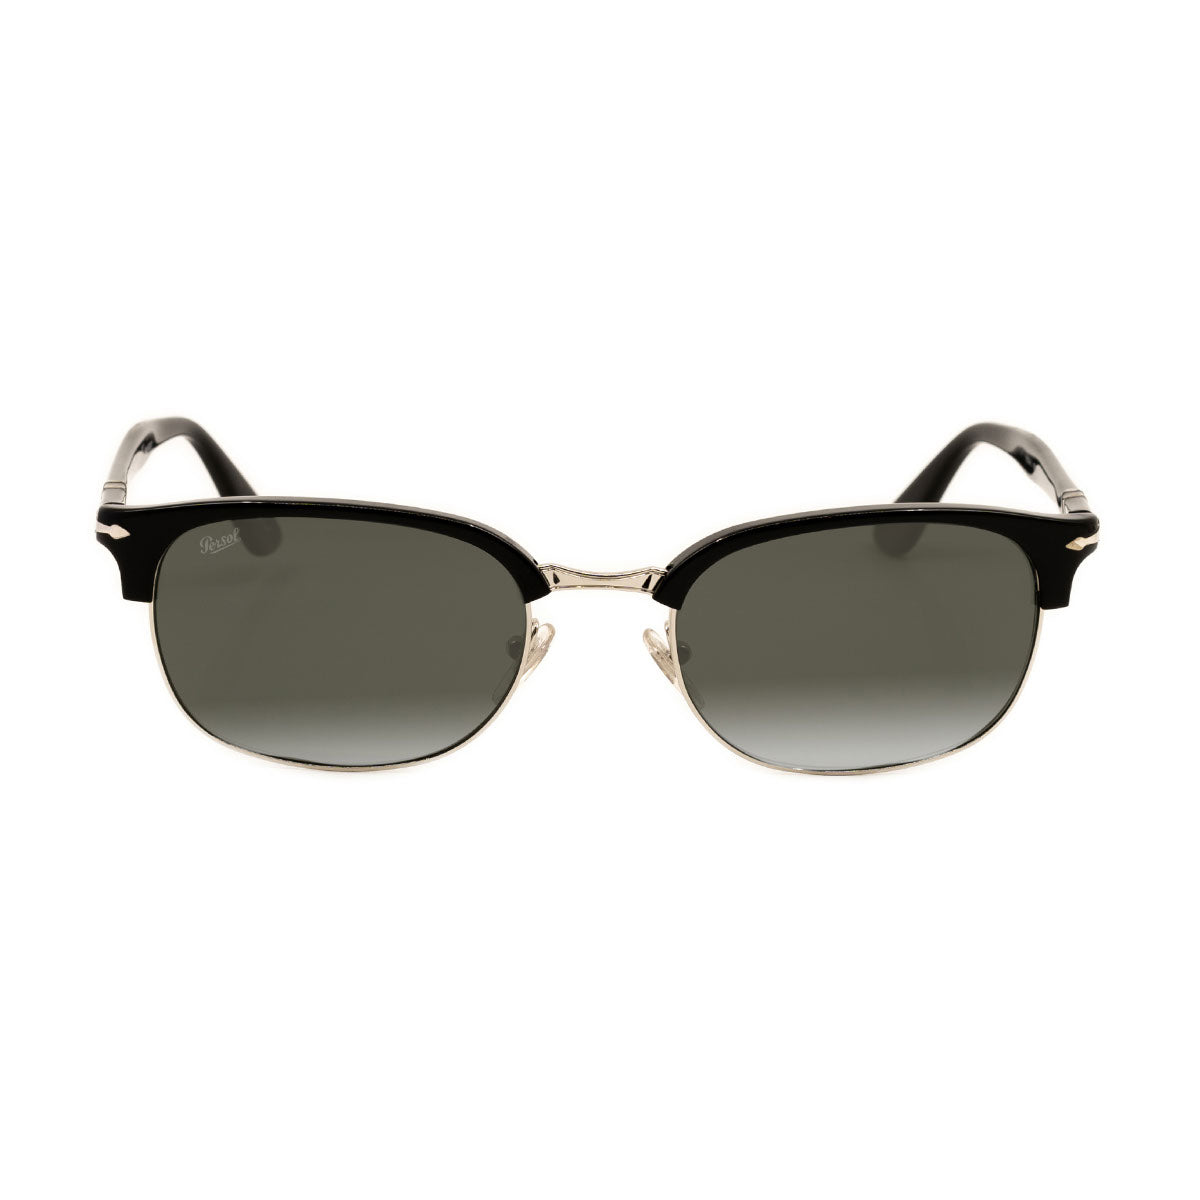 PERSOL 8139-S 95/58